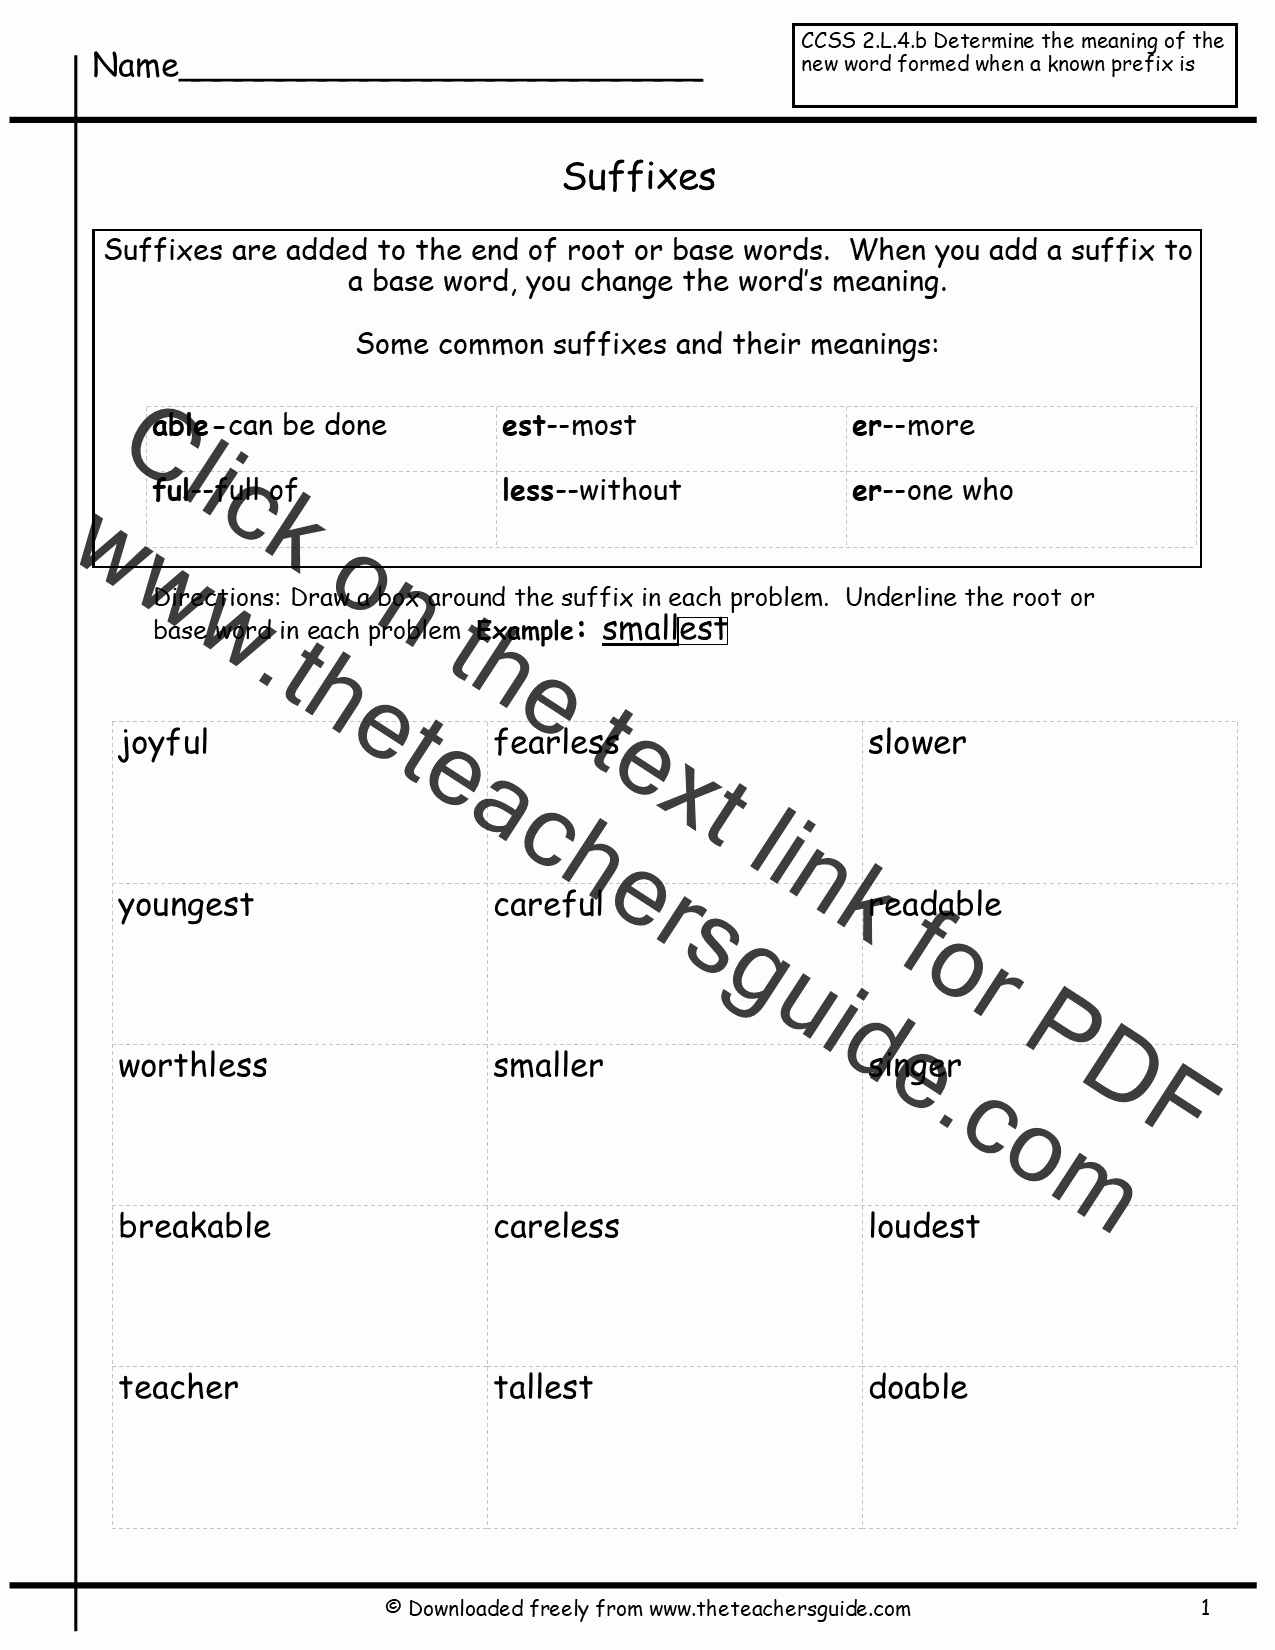 Free Suffix Worksheet Lovely Free Prefixes and Suffixes Worksheets From the Teacher S Guide